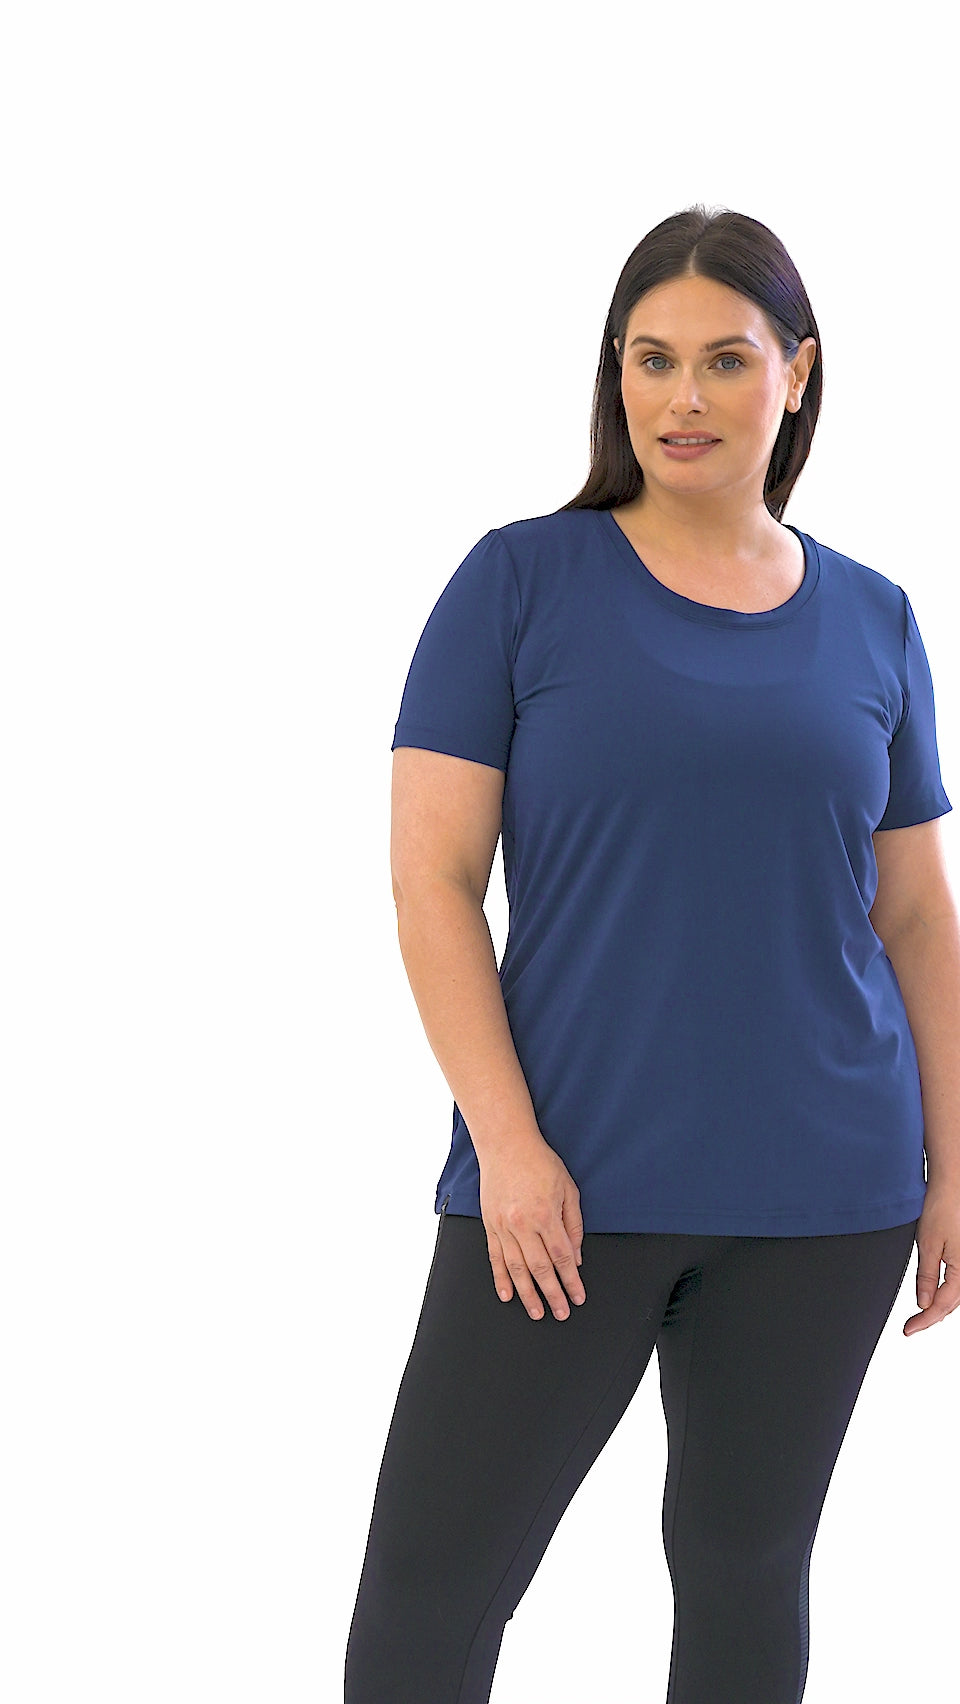 The Aglity  - Short-sleeve t-shirt biodegradable fabric⎮ Plus Size **FINAL SALE